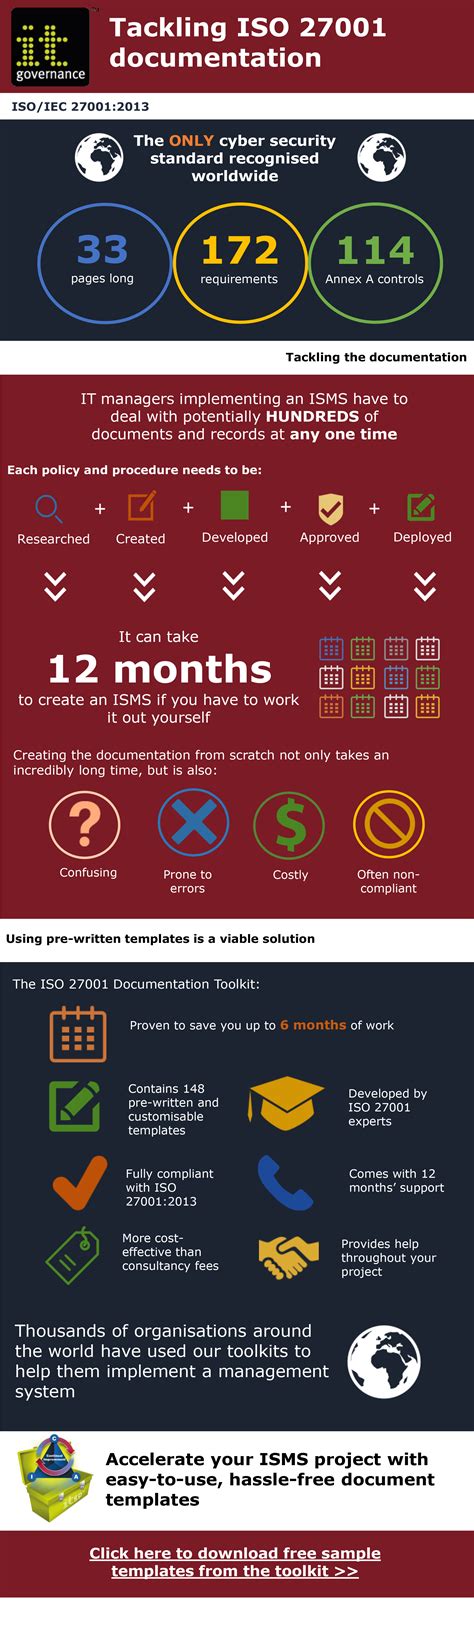 Check Out The Infographic That Shows The Pitfalls Involved In Creating